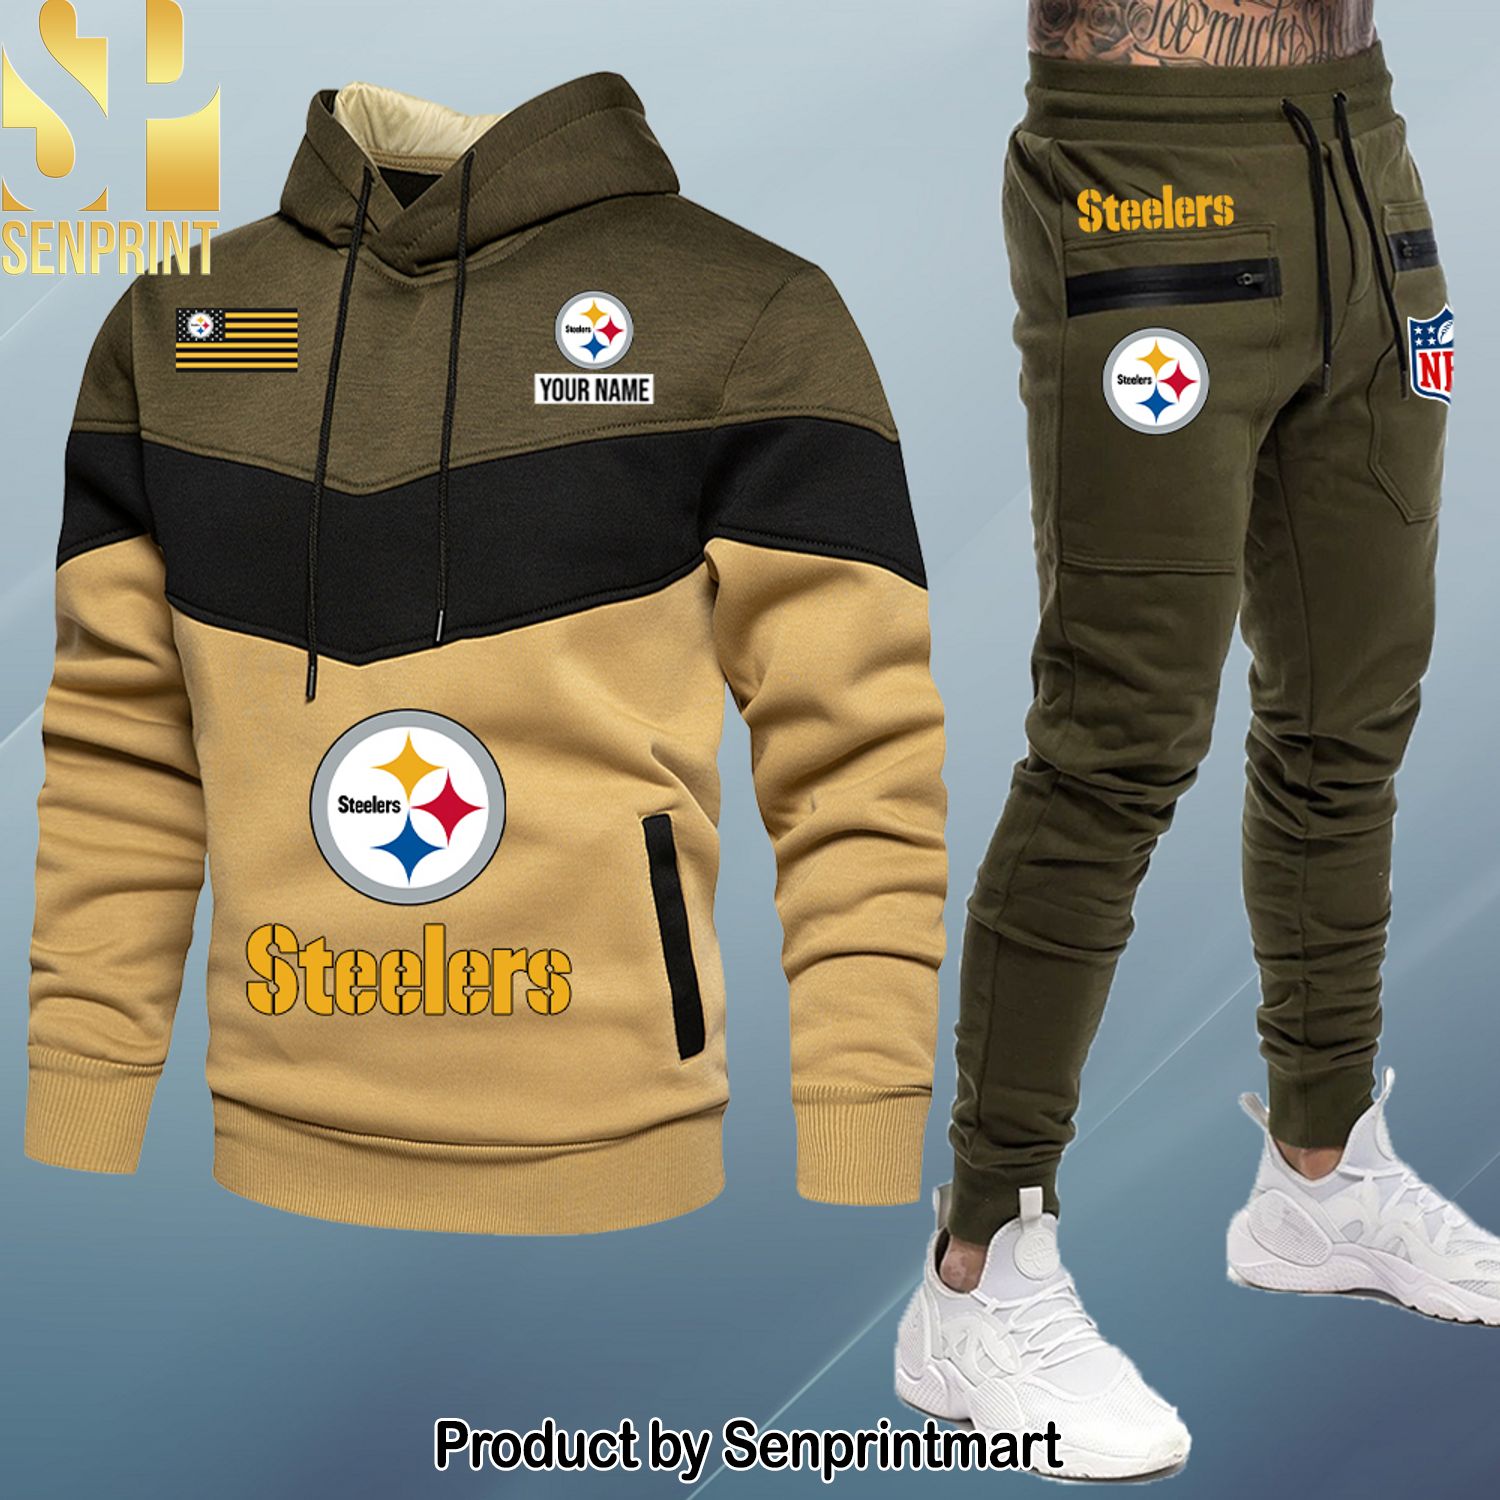 Pittsburgh Steelers Hypebeast Fashion Shirt and Pants